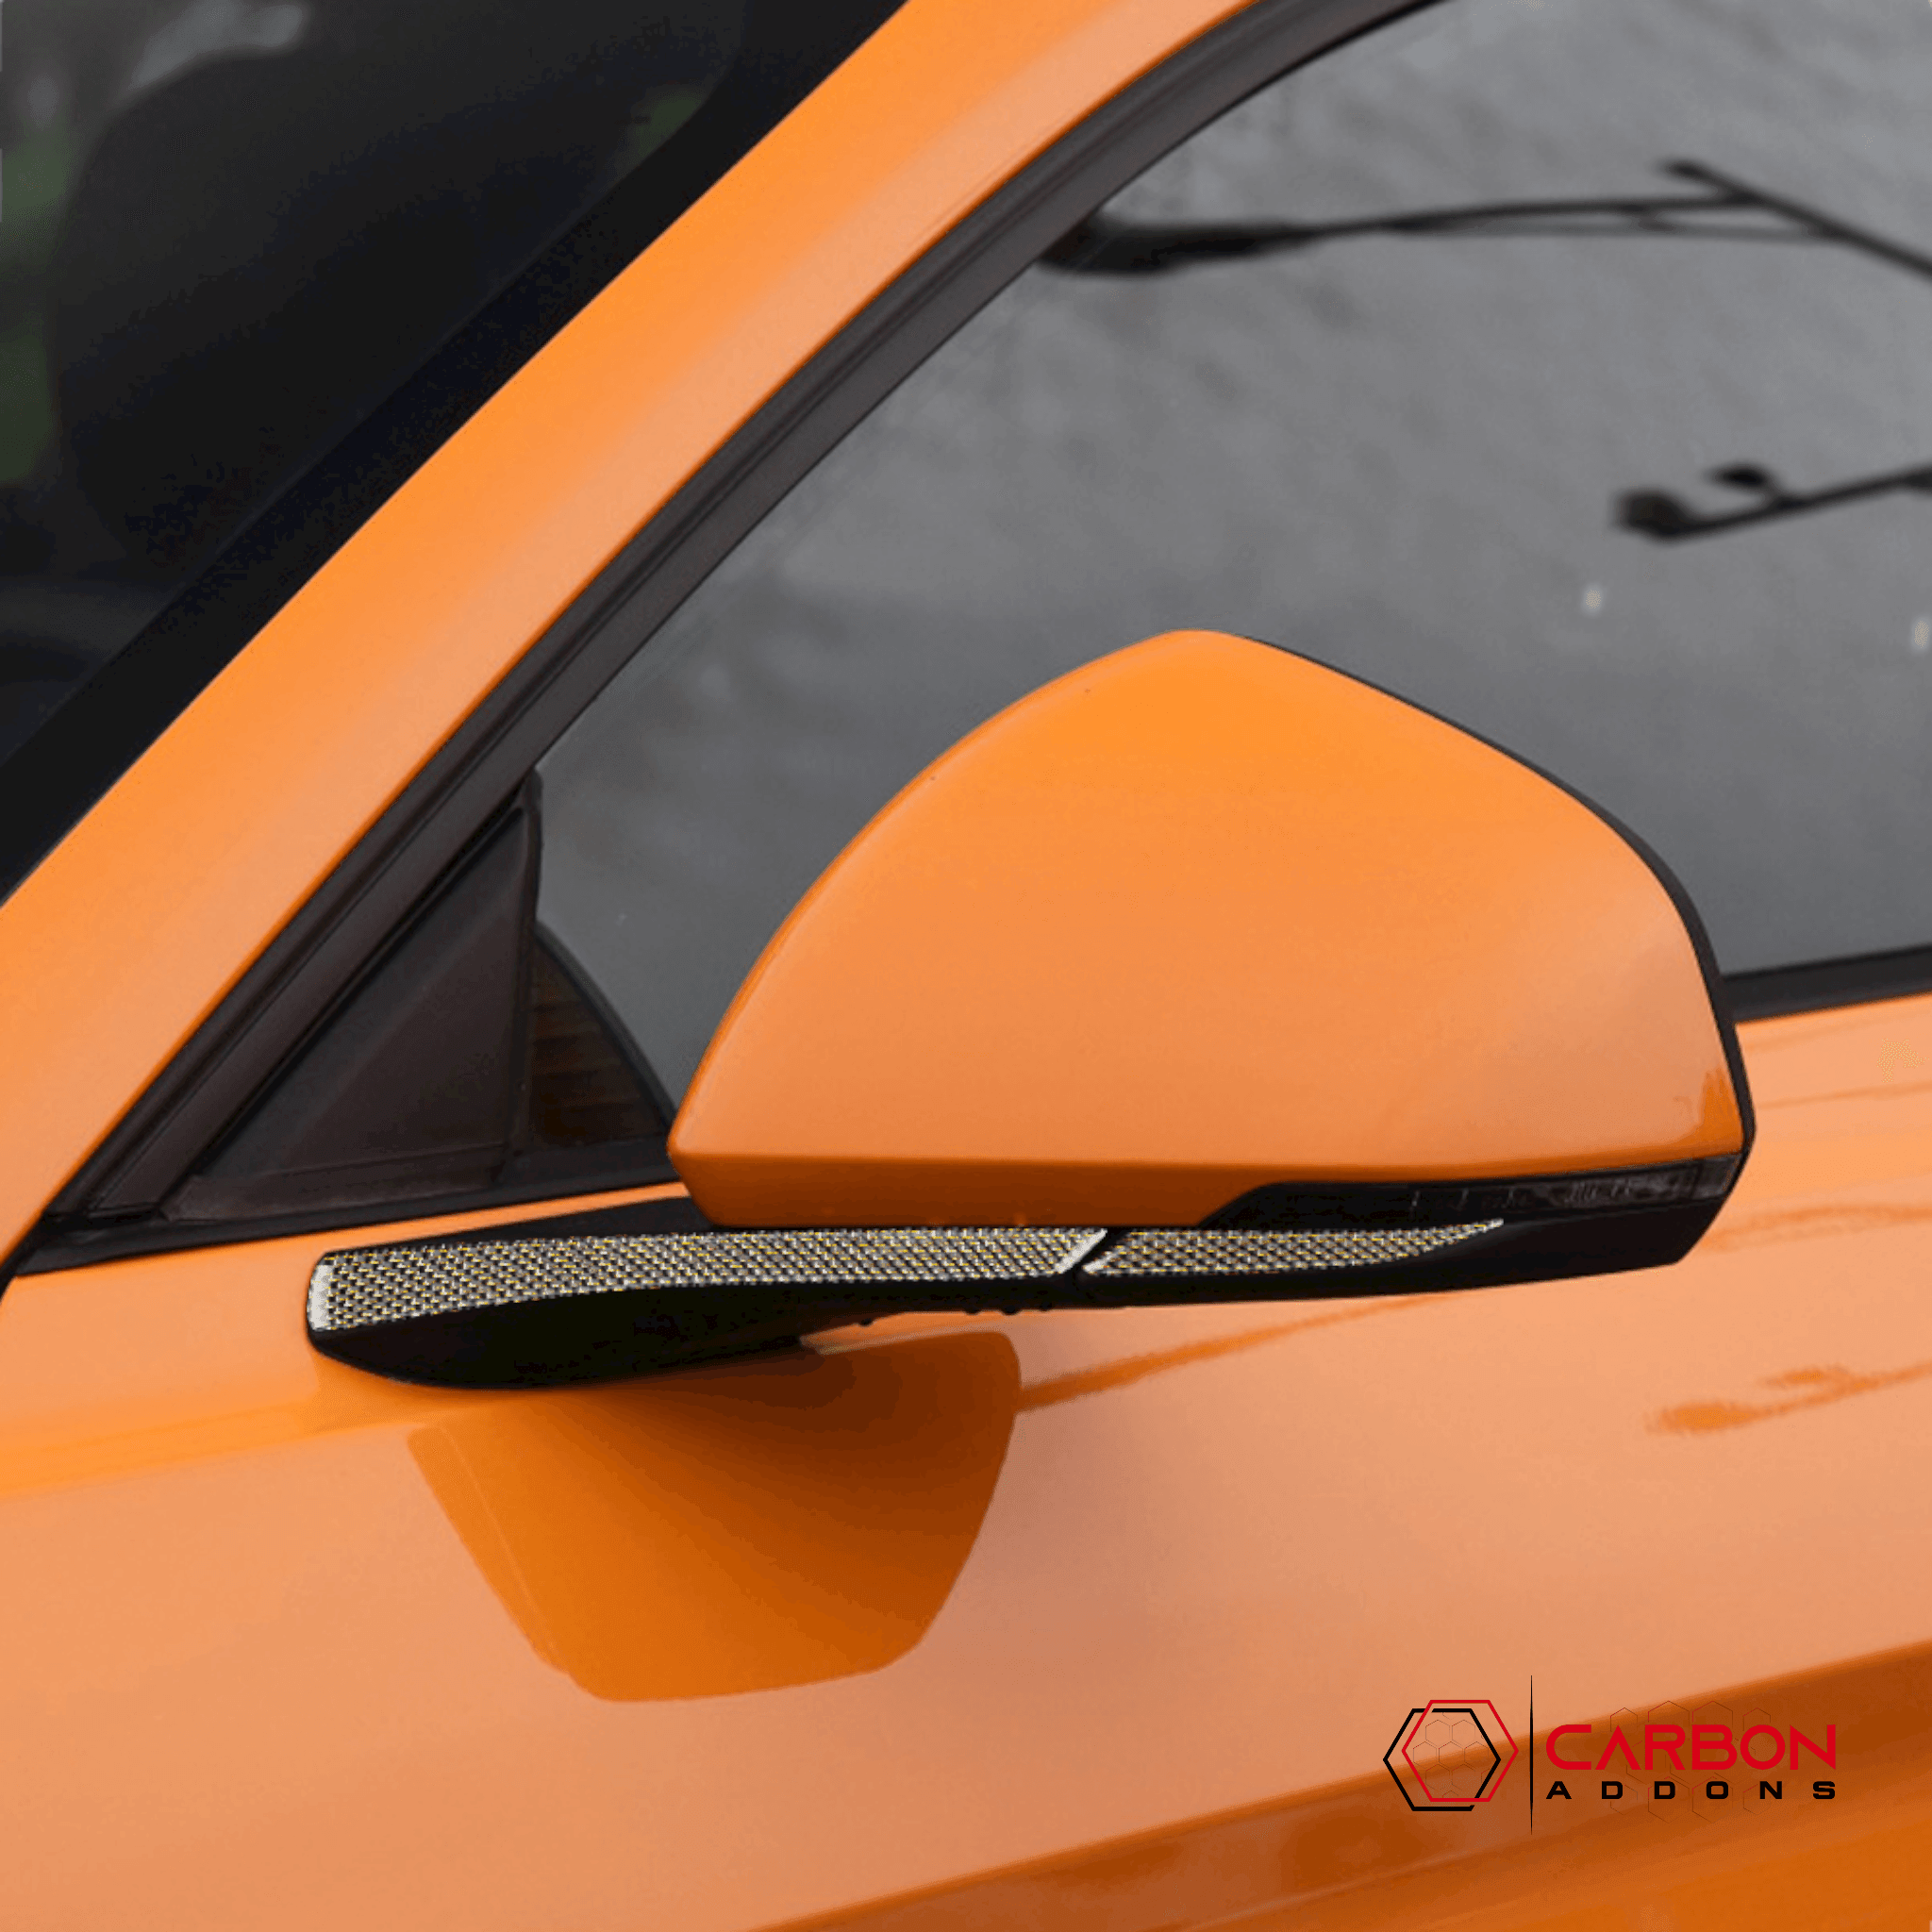 Reflective Carbon Fiber Rear View Mirror Trim Overlay For Ford Mustang 2015-2023 - carbonaddons Carbon Fiber Parts, Accessories, Upgrades, Mods